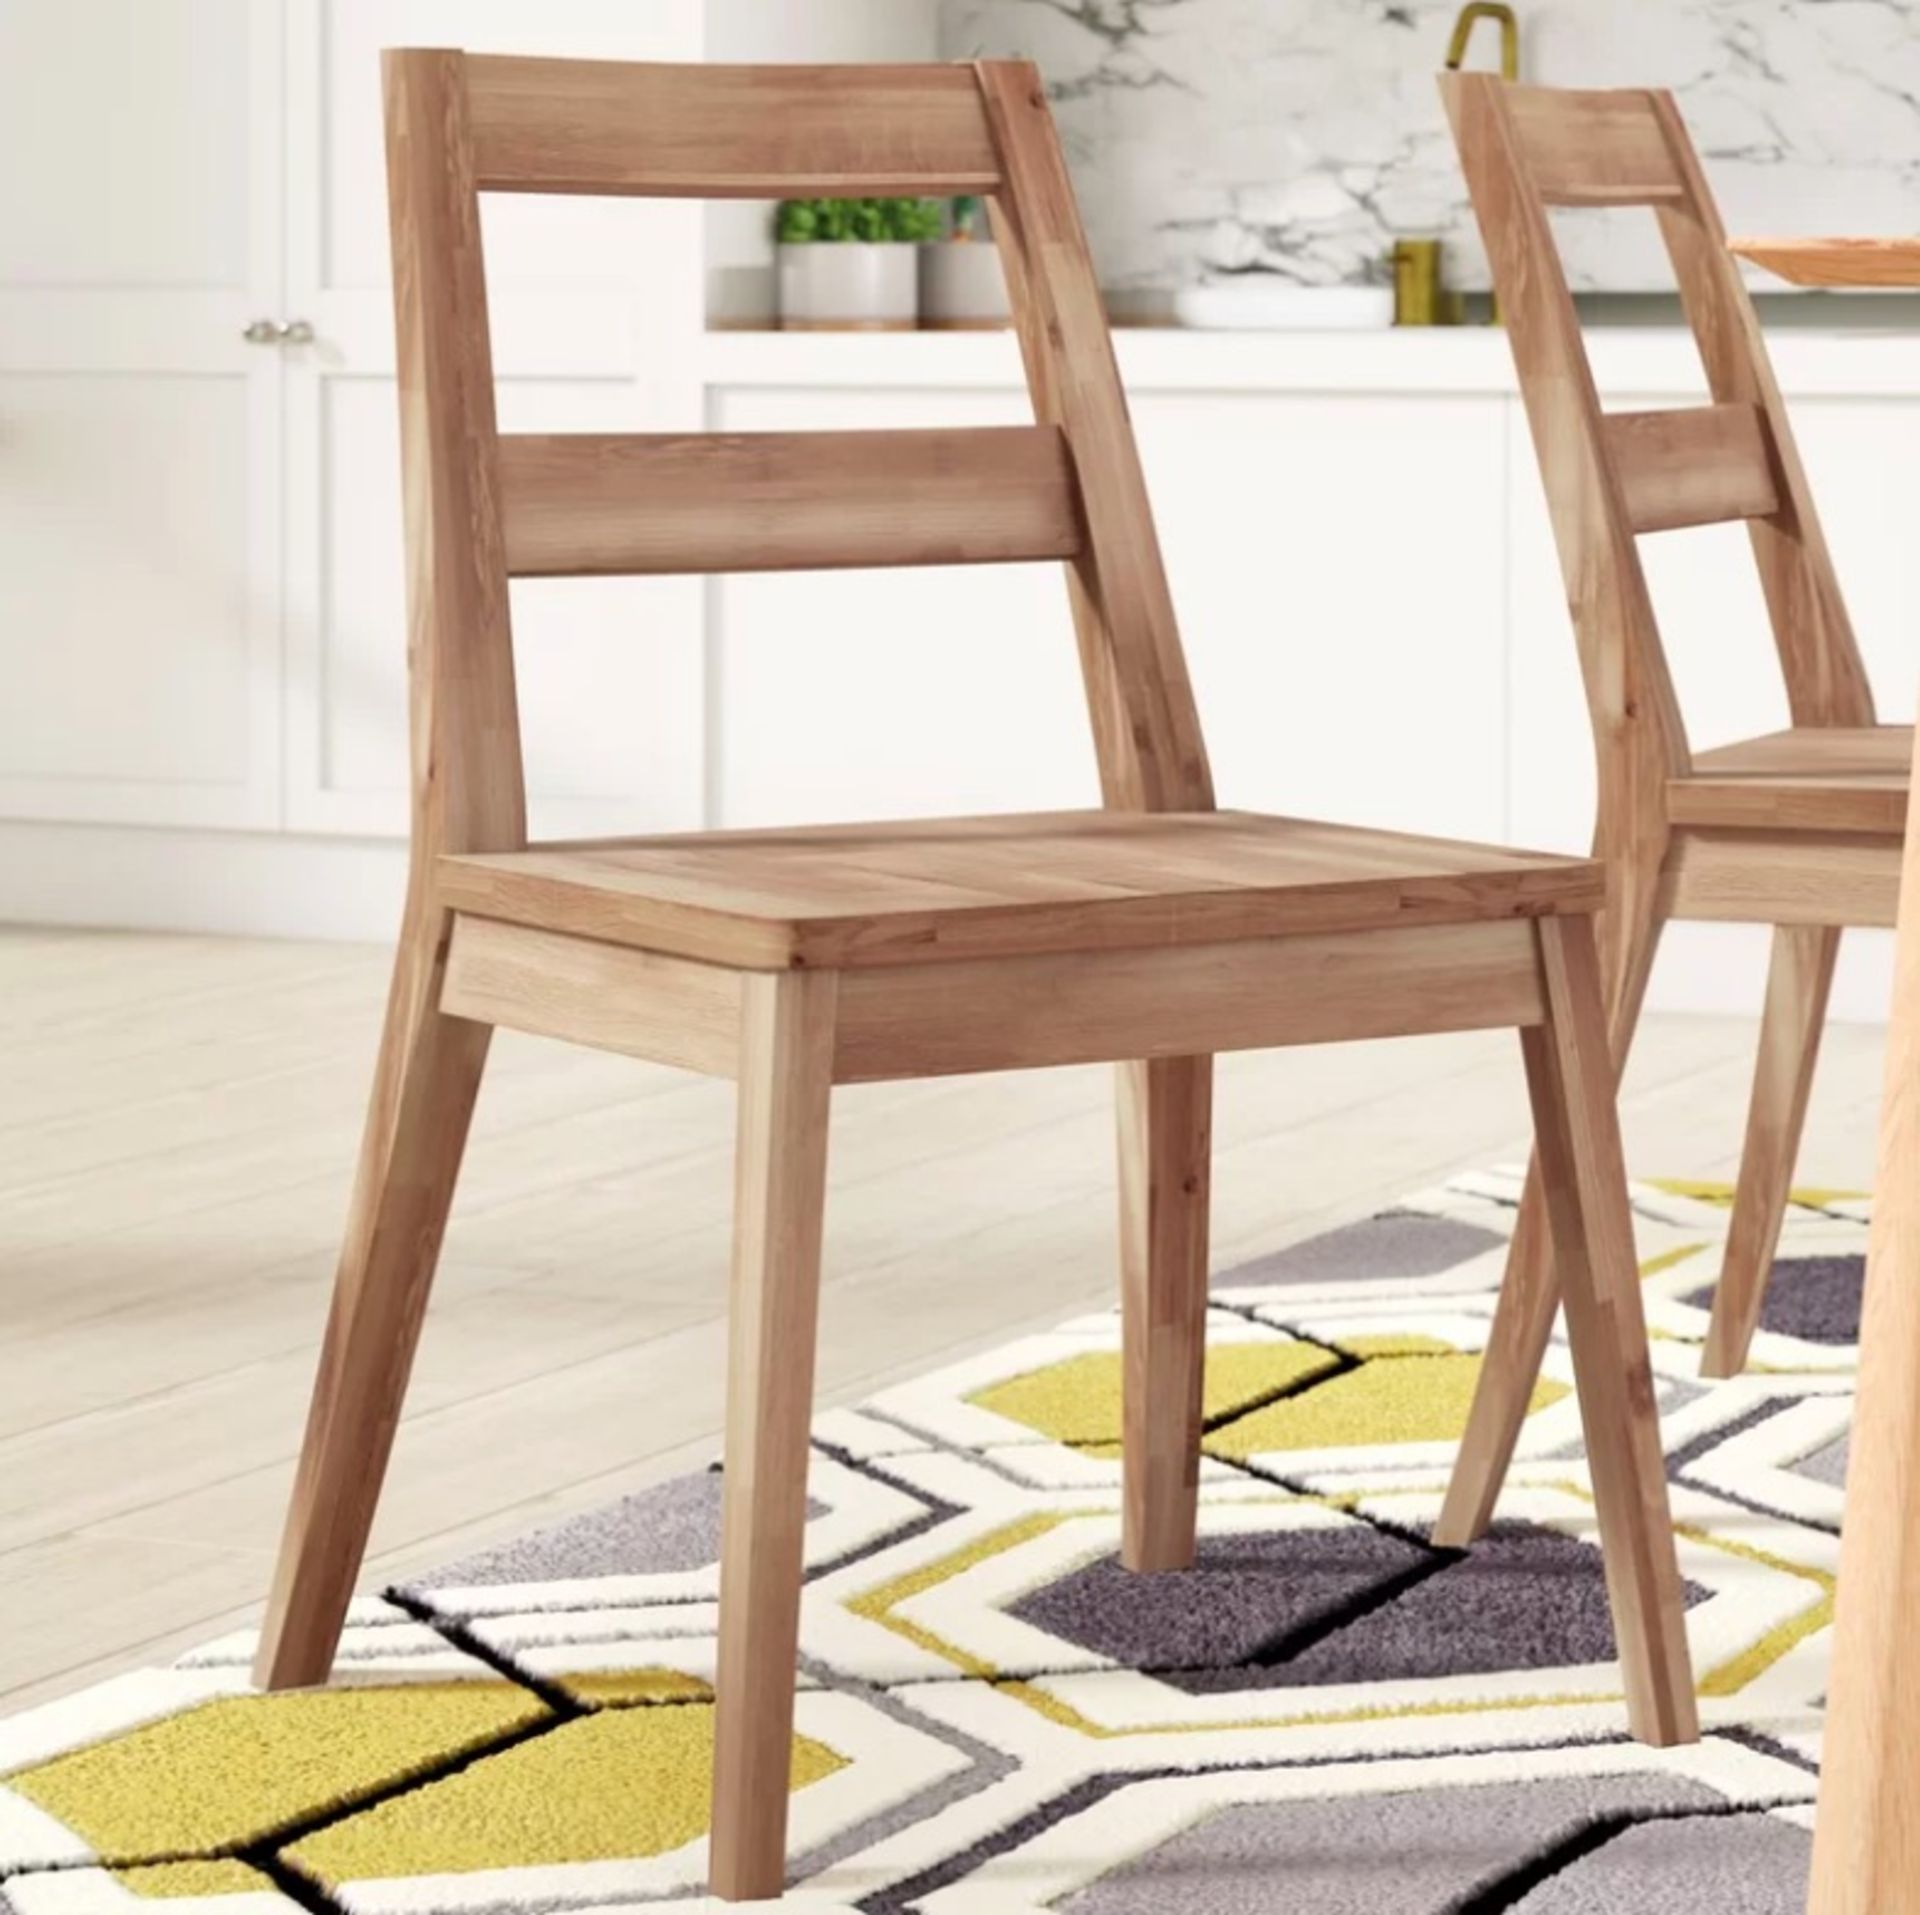 Waltham Dining Chair Set of 2 With its natural oak wood finish and minimalist design, this dining